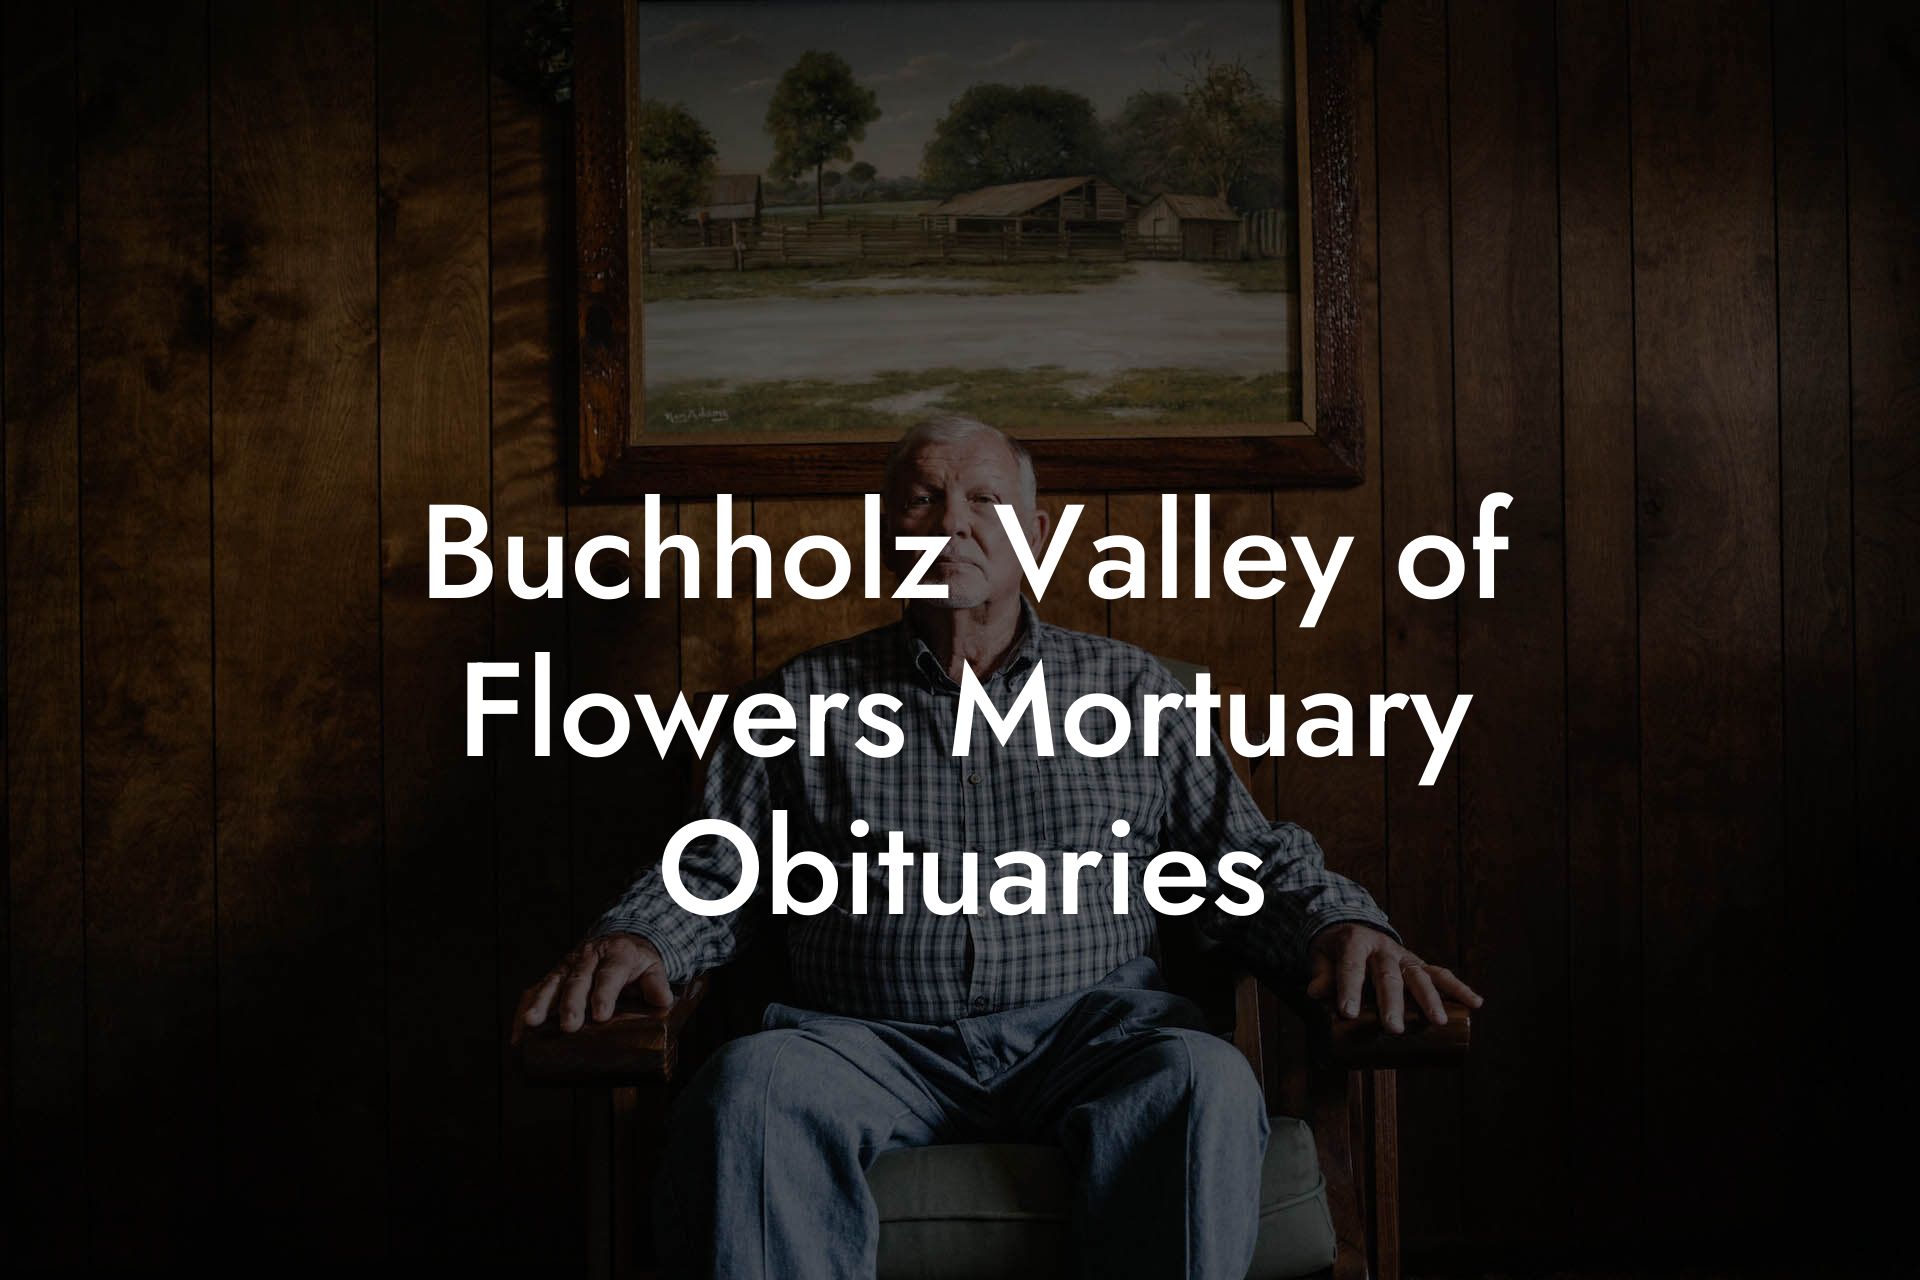 Buchholz Valley of Flowers Mortuary Obituaries